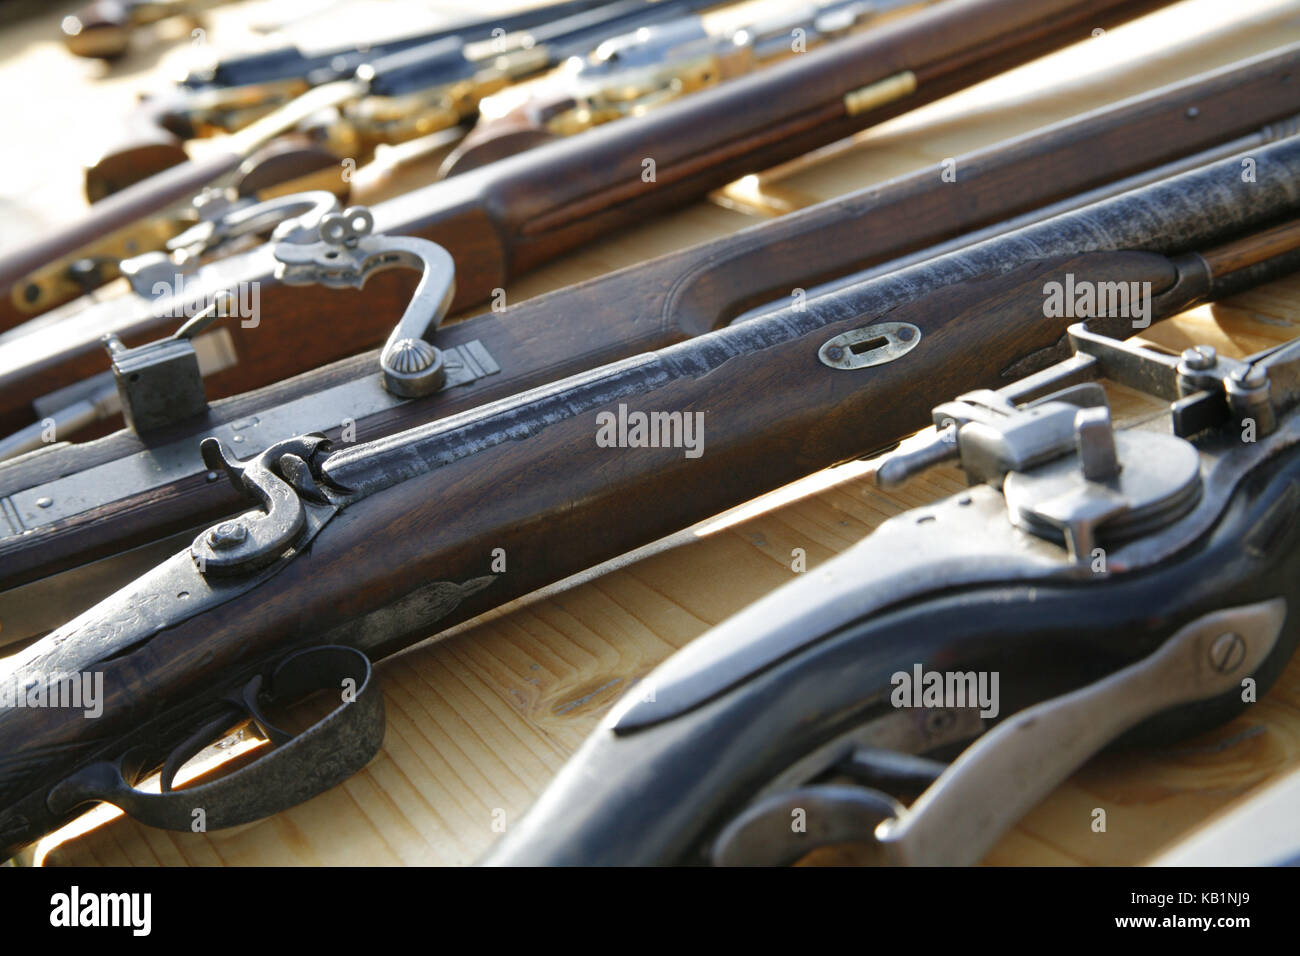 Old firearms, muzzle loaders, Stock Photo